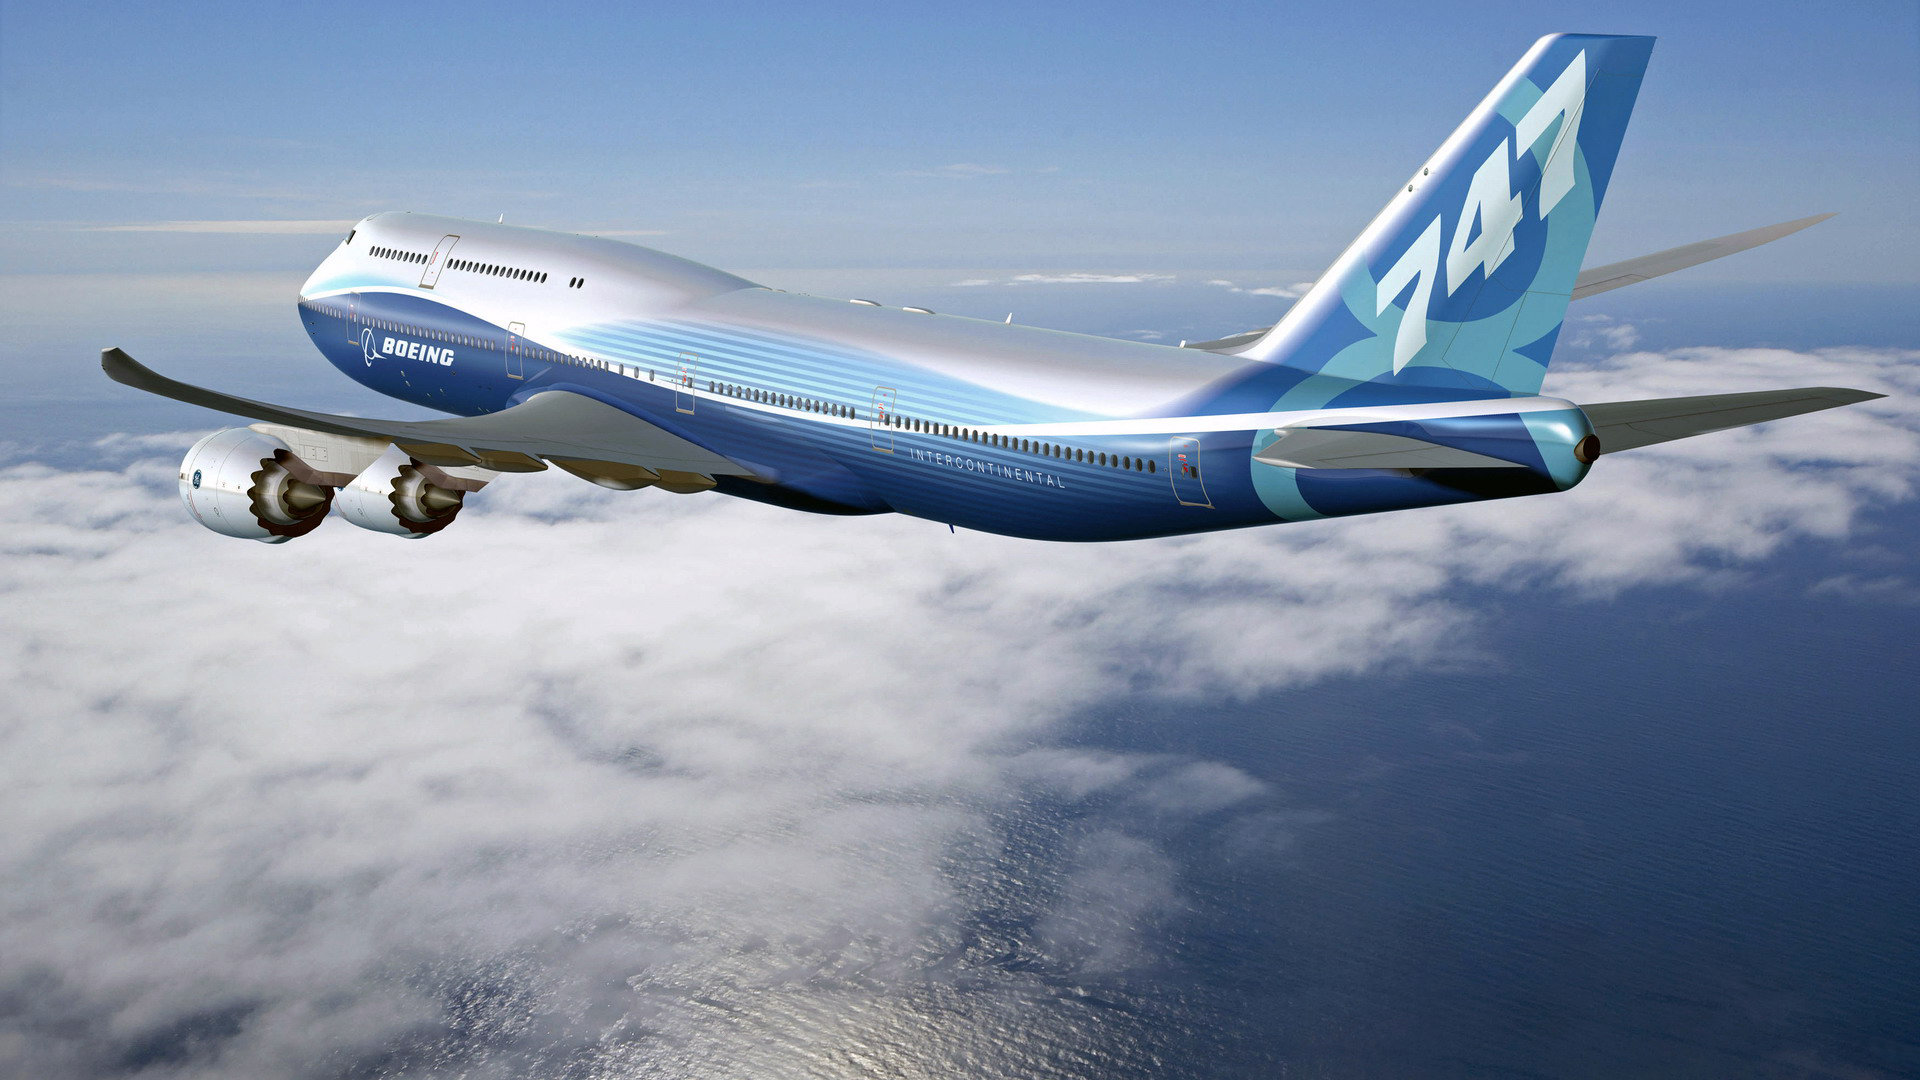 Free Download Airplane & Aircraft Wallpaper Id - Boeing 747 High Resolution  - 1920x1080 Wallpaper 